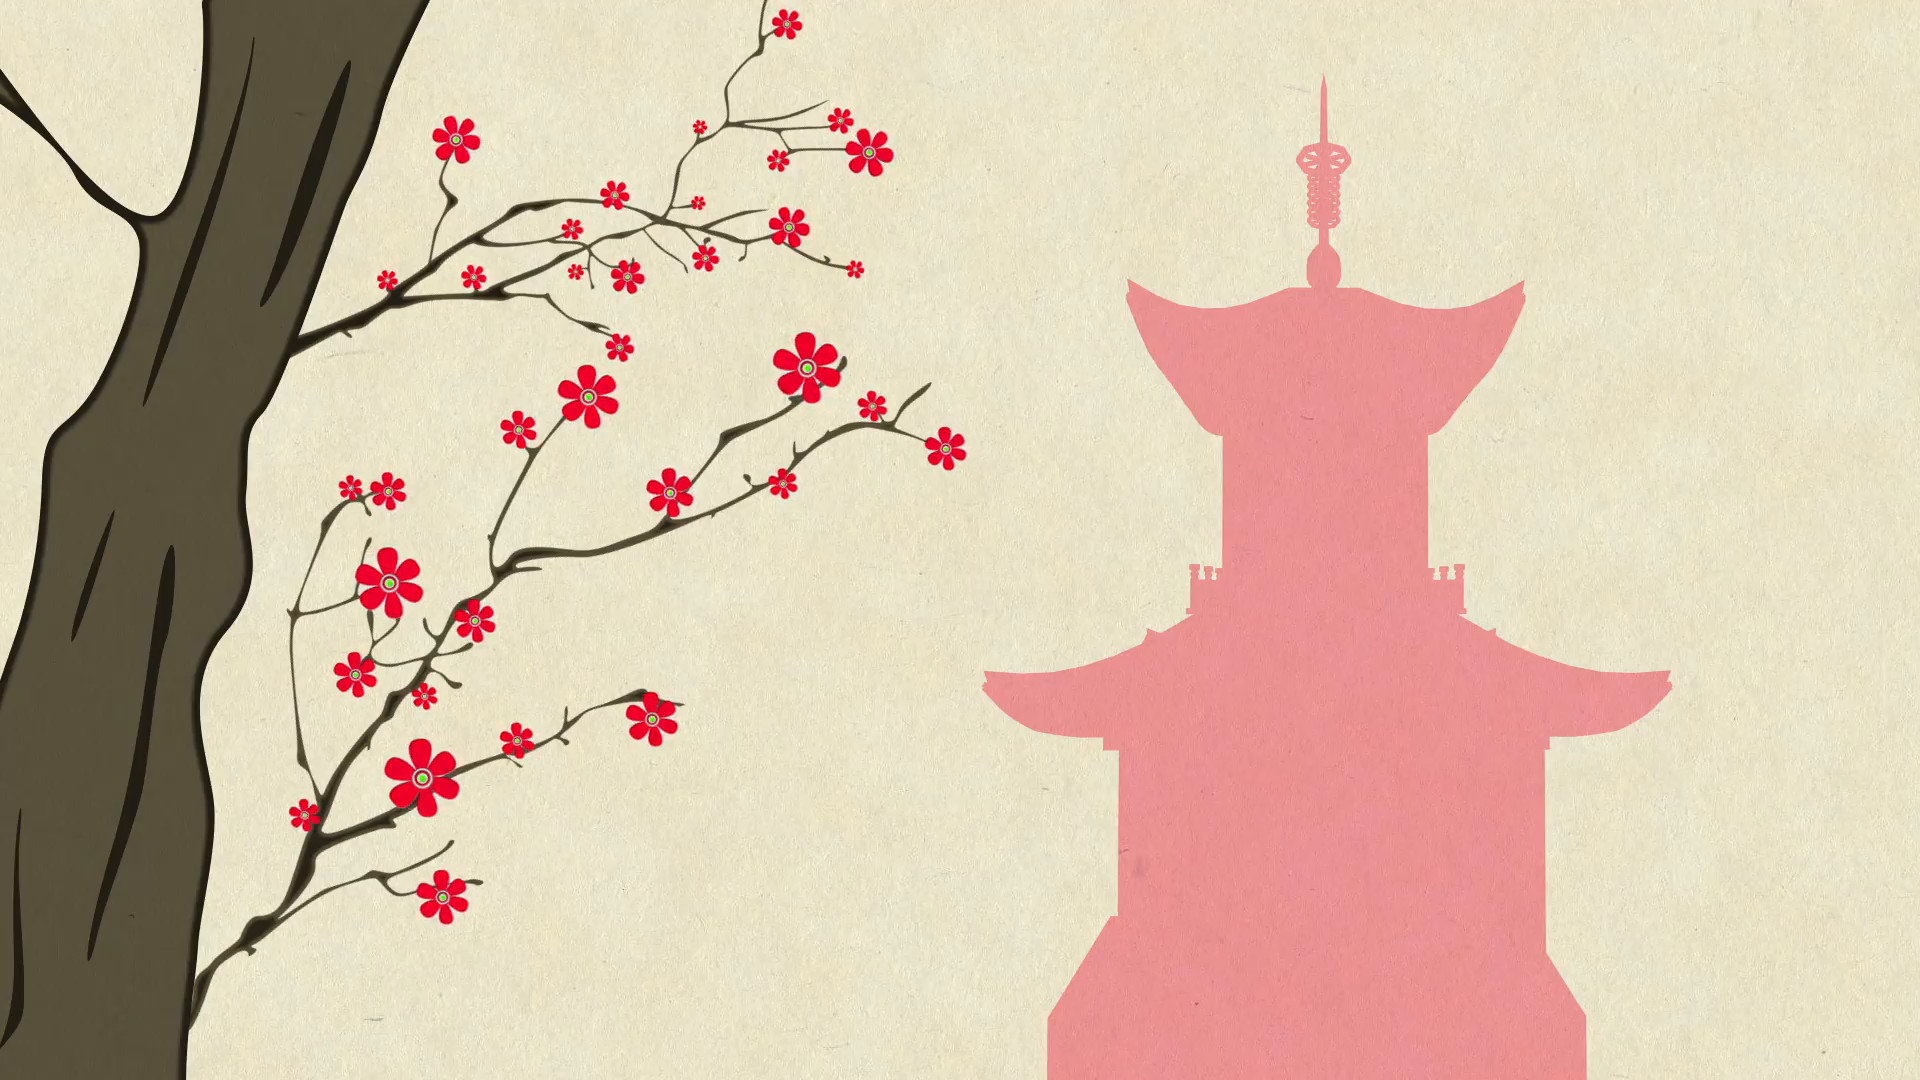 1920x1080 Cherry Blossoming Pagoda 7 Springtime Illustration Rotating Spring Flowers  on Cherry Tree Branches Motion Background - Storyblocks Video